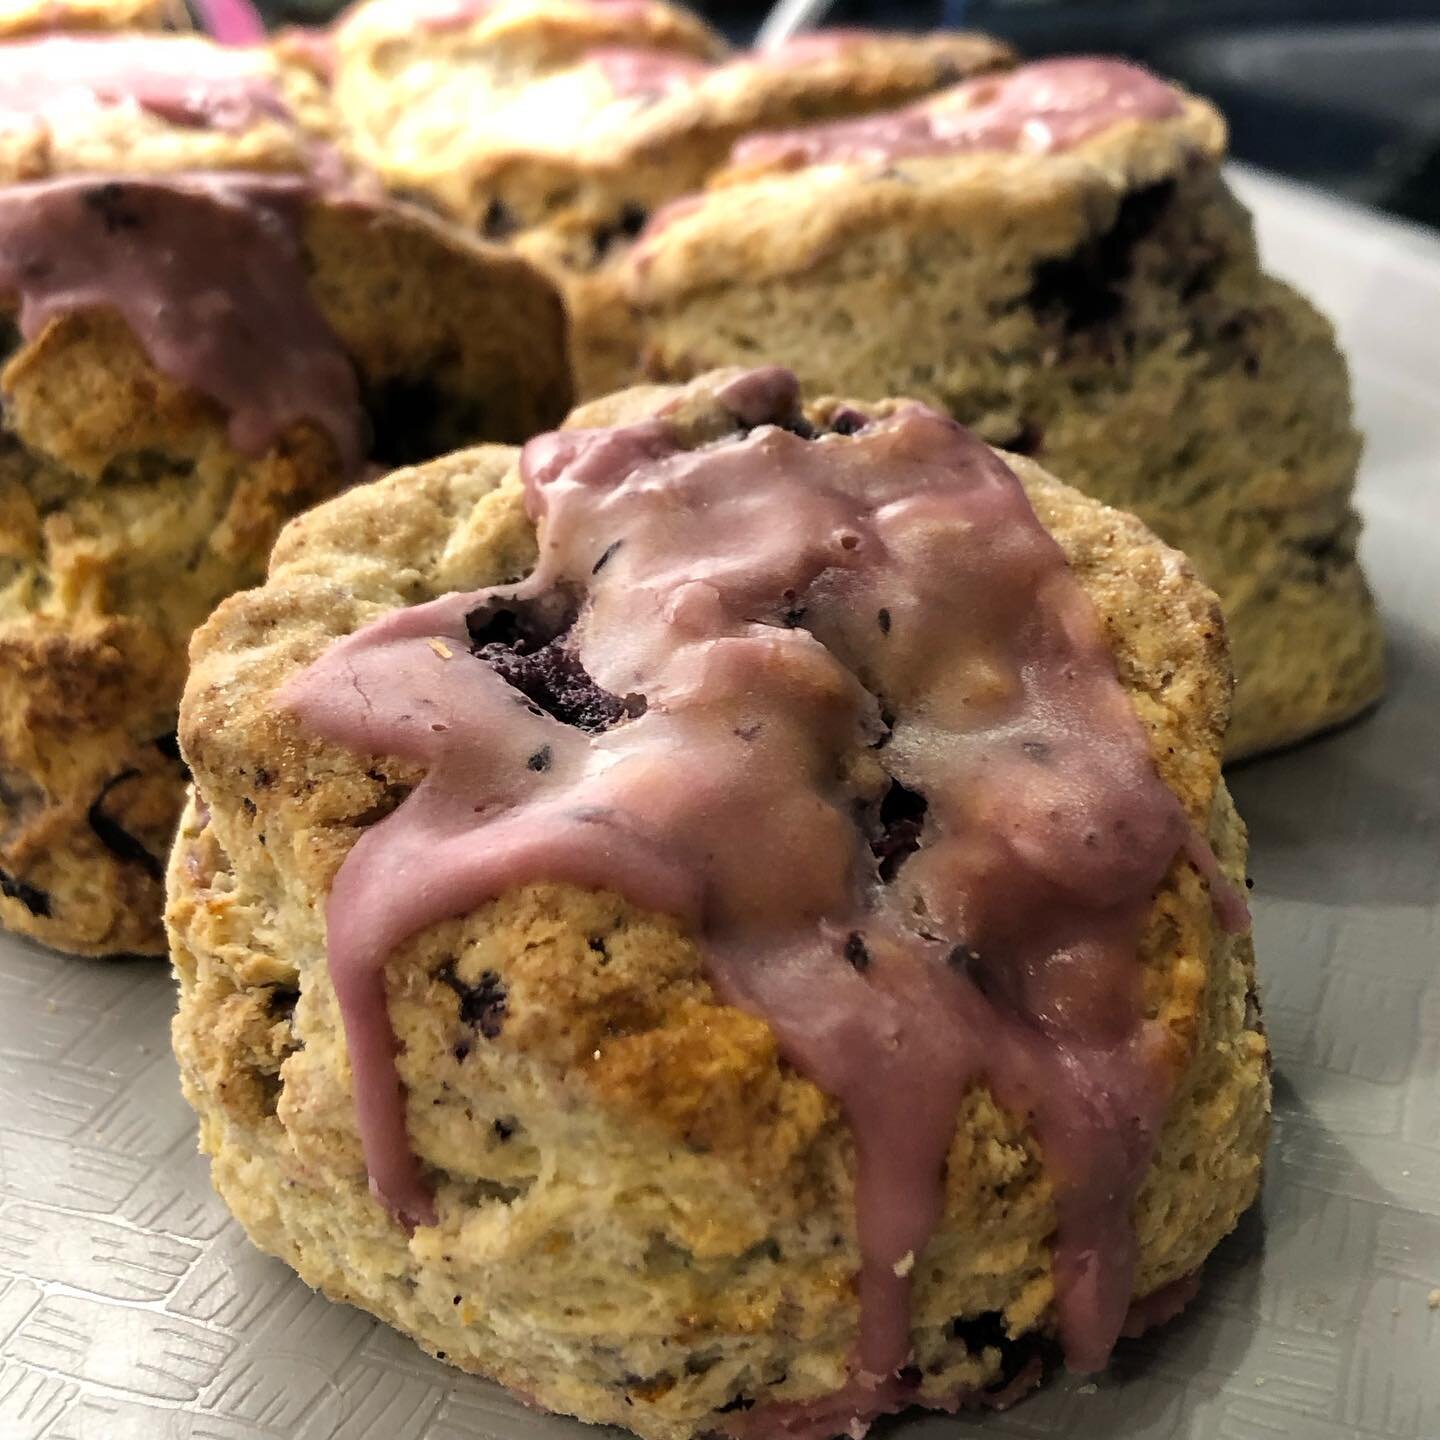 Scone alert! We currently have a ton of varieties of our delicious buttermilk scones: pictured is our Blueberry Orange, Chocolate Orange and Raspberry White Chocolate! 

We&rsquo;re open Wednesdays 10-5pm, and Thursdays through Saturdays 10-6pm! 

#r